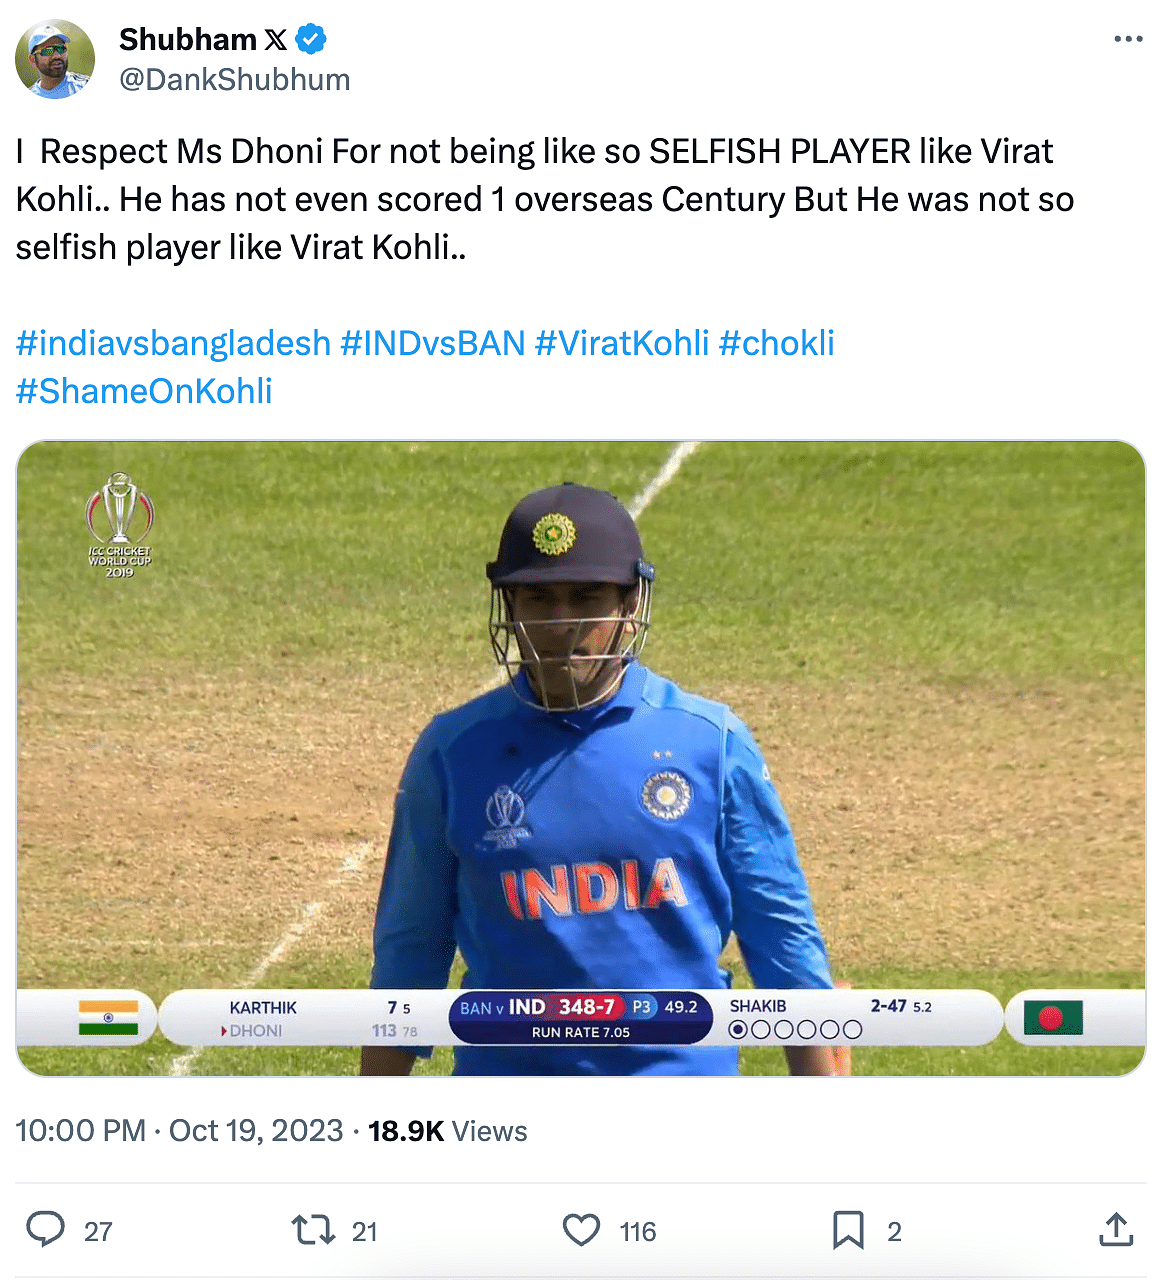 #CWC23 | KL Rahul told broadcasters that he encouraged Kohli to complete his century and denied singles.